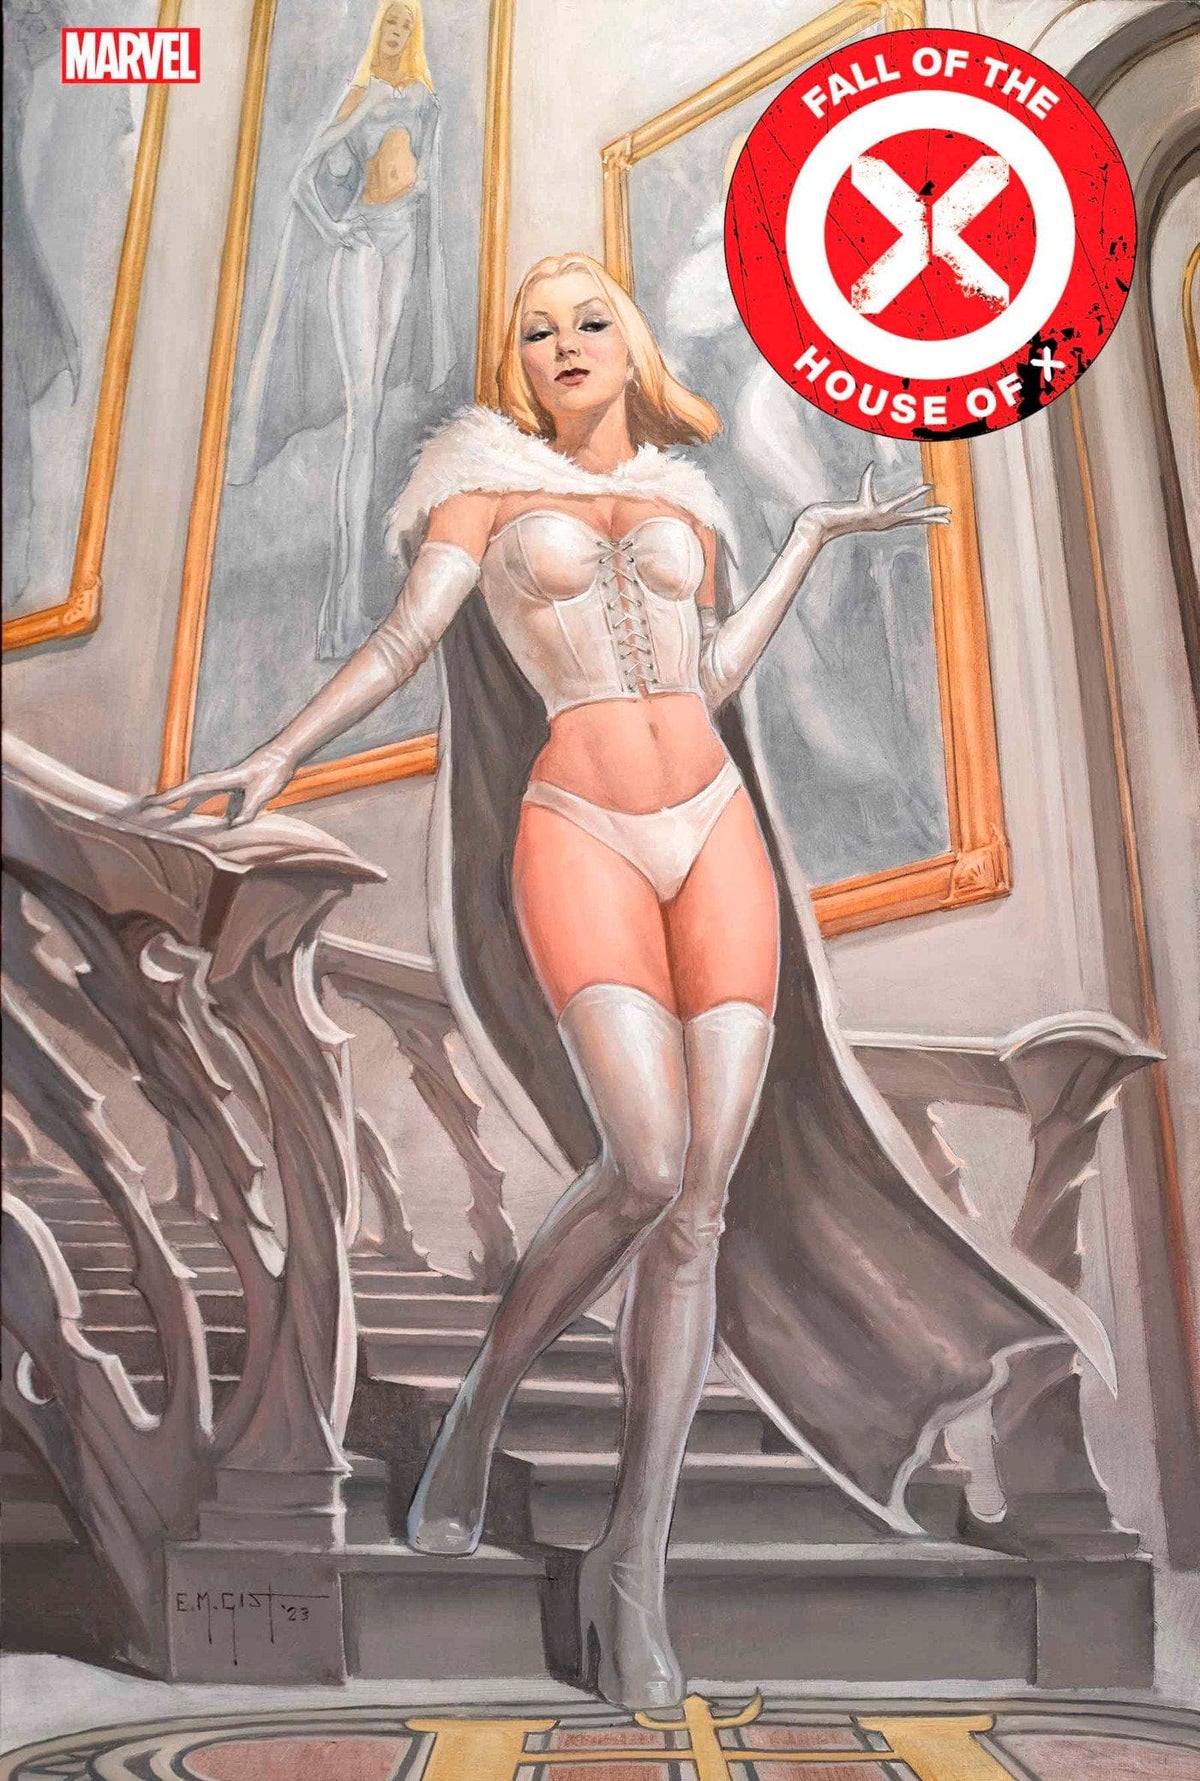 FALL OF THE HOUSE OF X #4 EM GIST EMMA FROST VAR